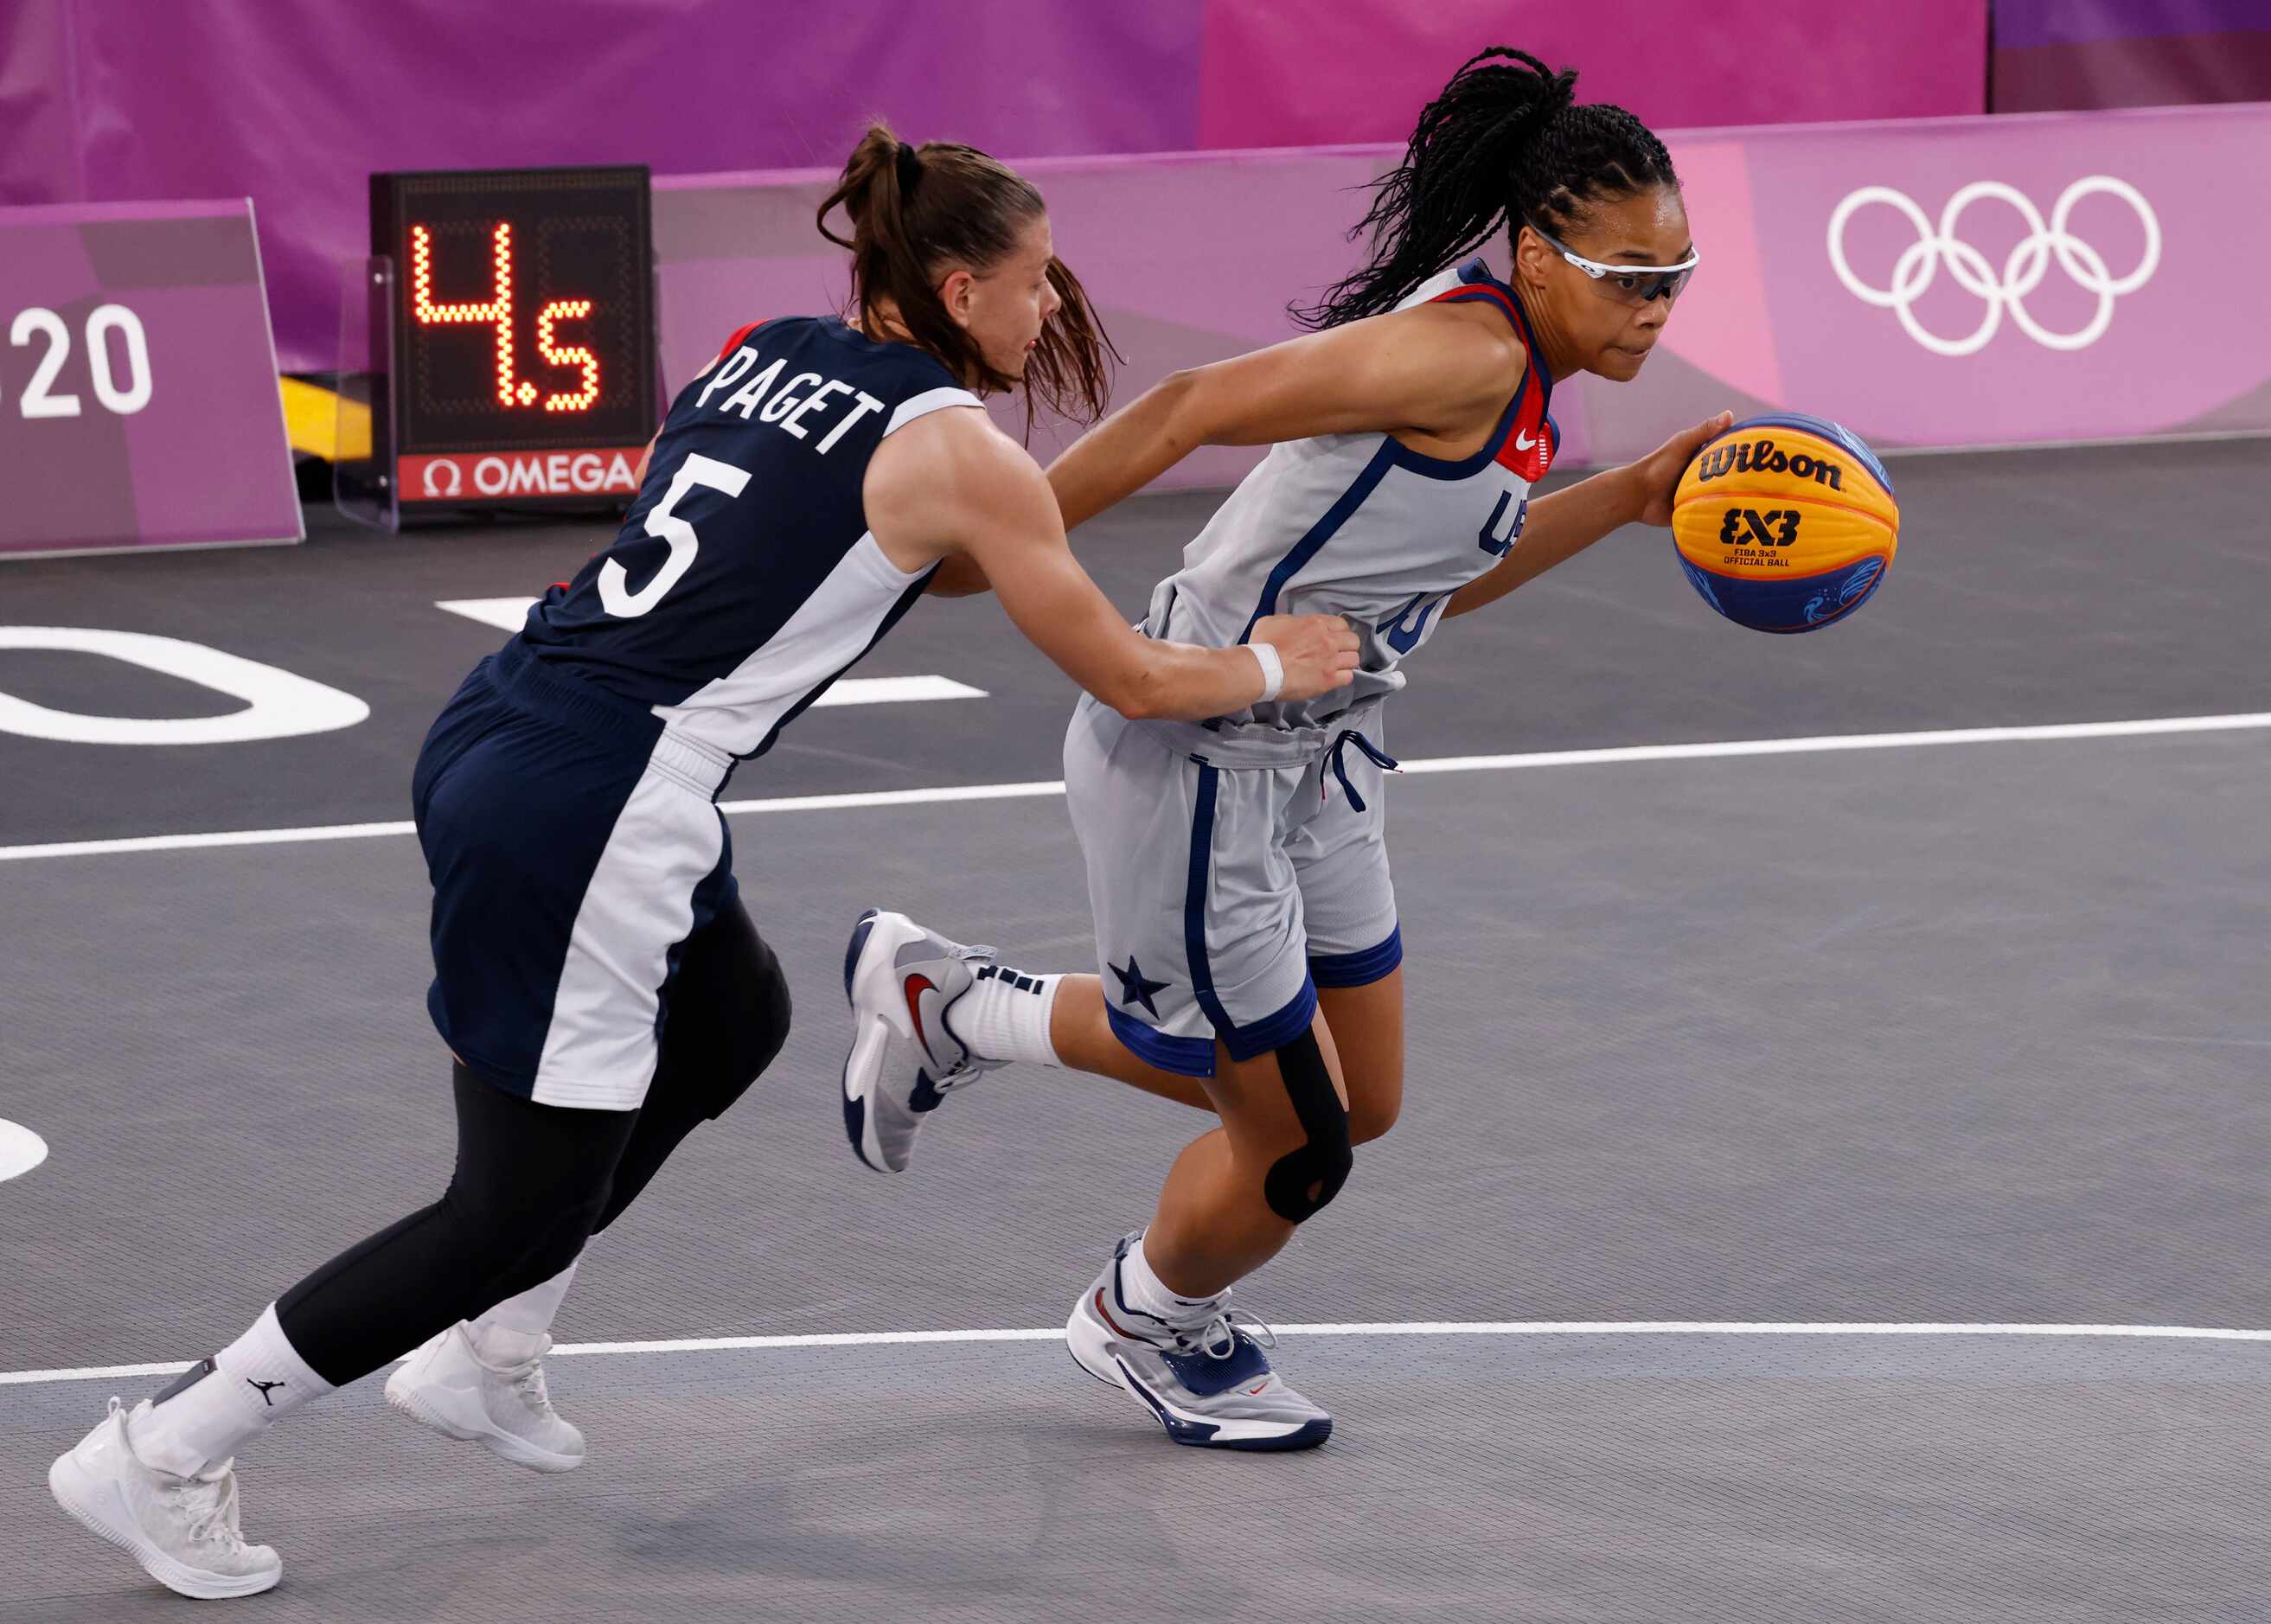 USA’s Allisha Gray (15) drives towards the basket as France’s Marie-Eve Paget (5) defends...